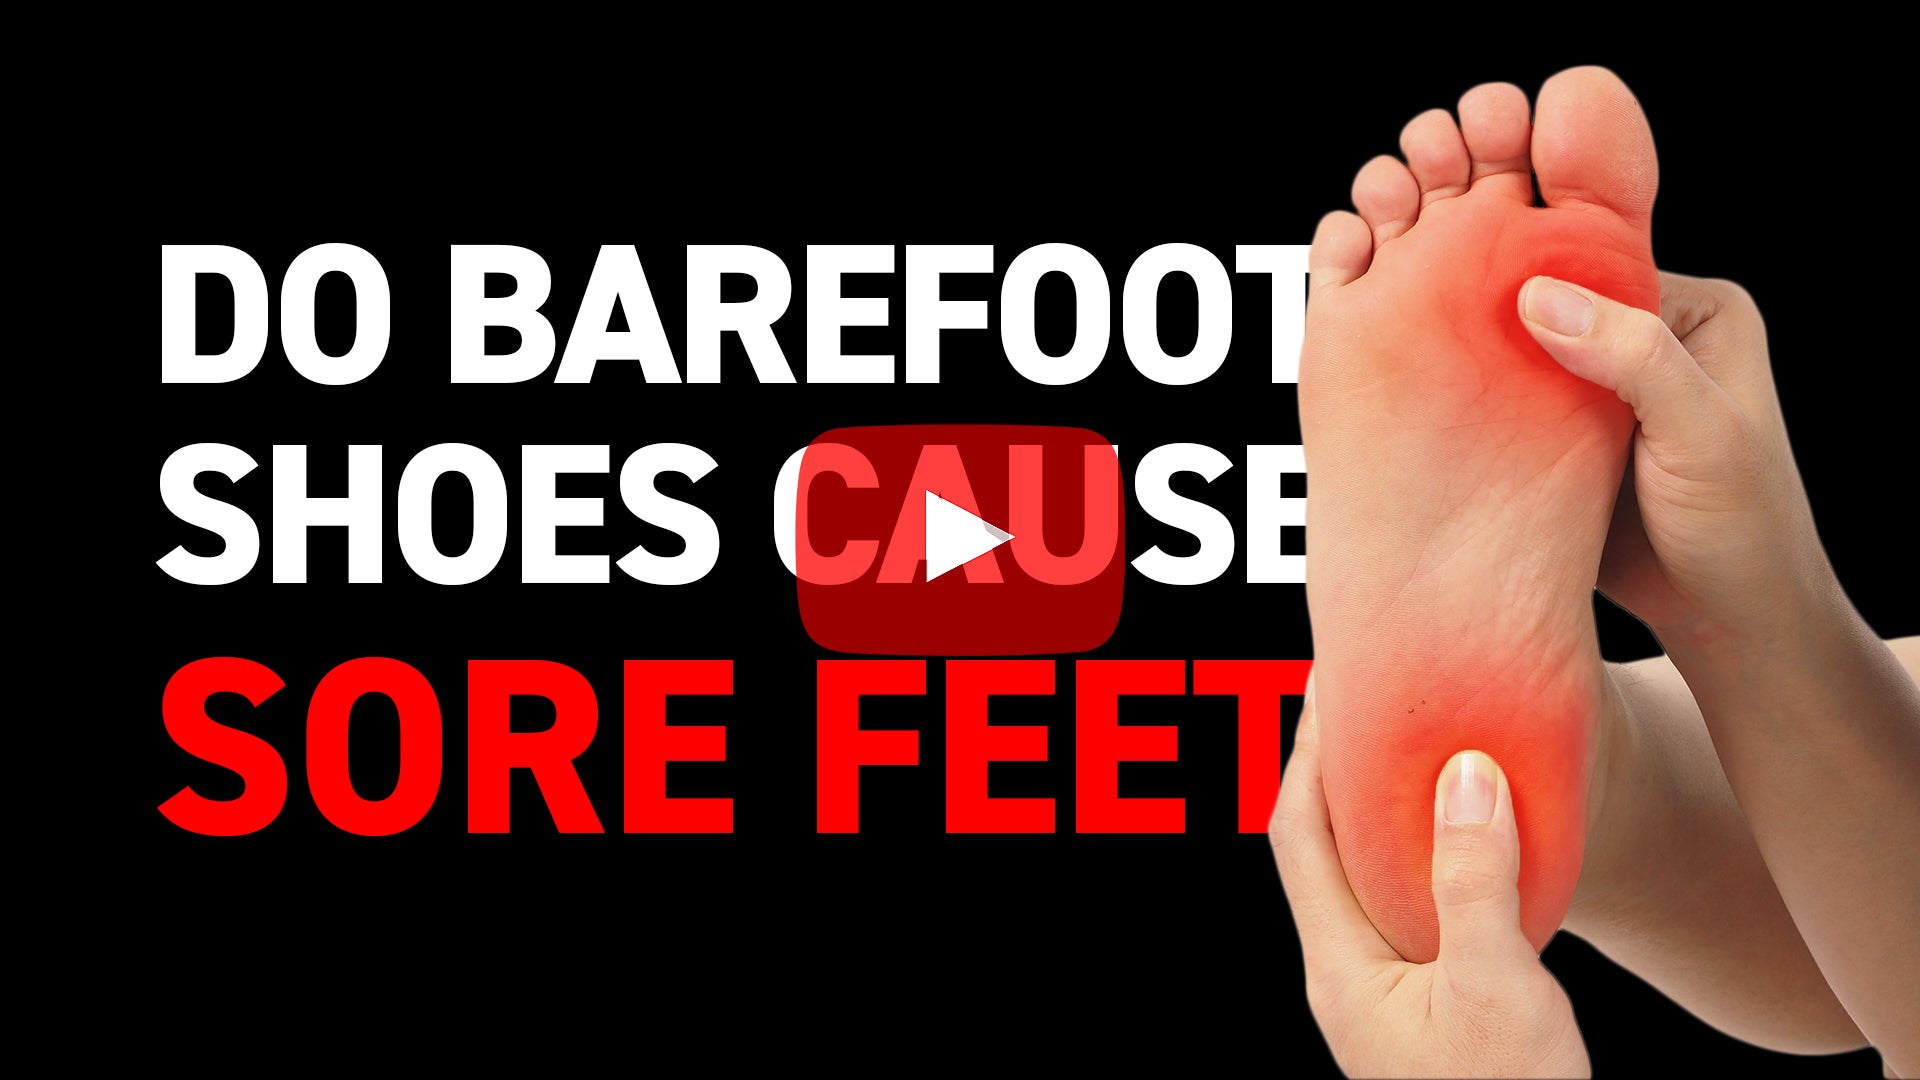 Do Barefoot Shoes Cause Sore Feet?